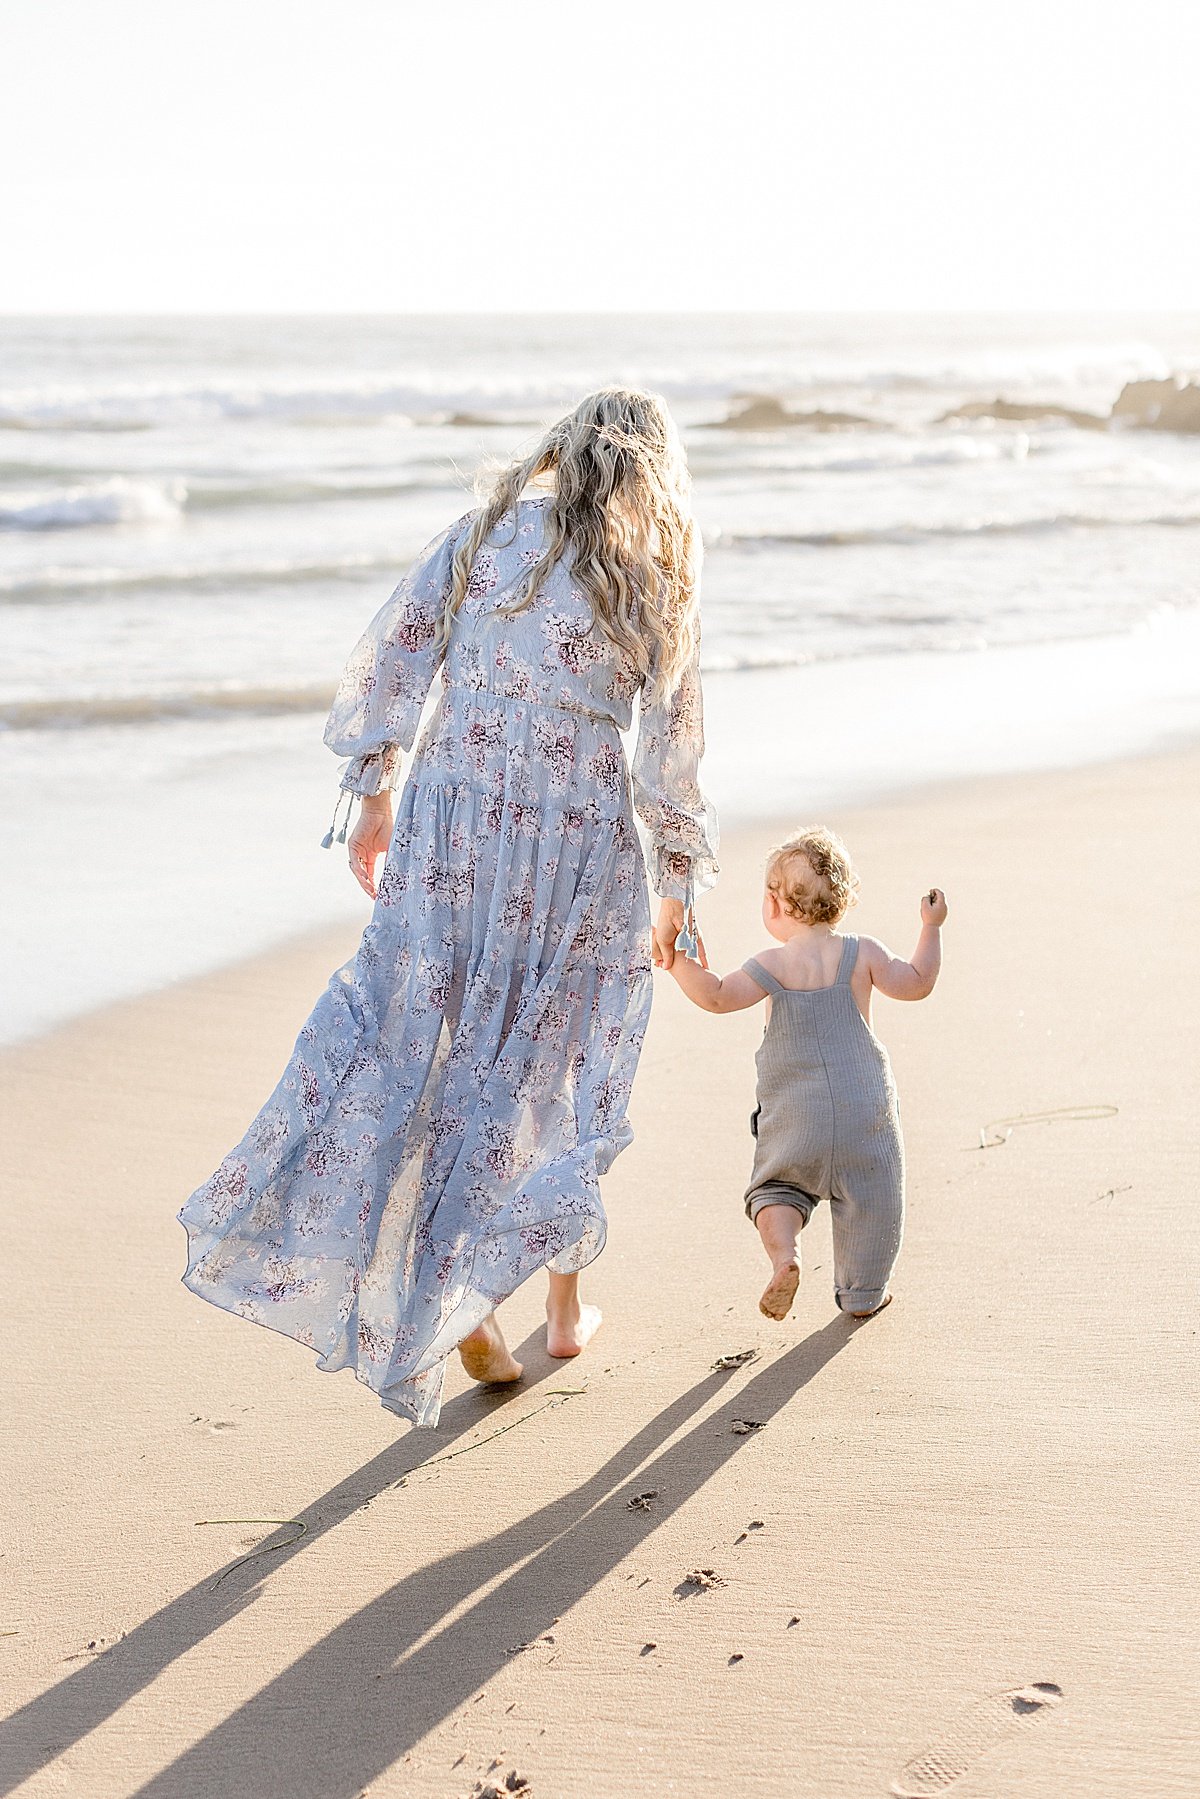 Candid portraits of Mom running with Baby boy in bad at beach session during sunset | Ambre Williams Photography in California